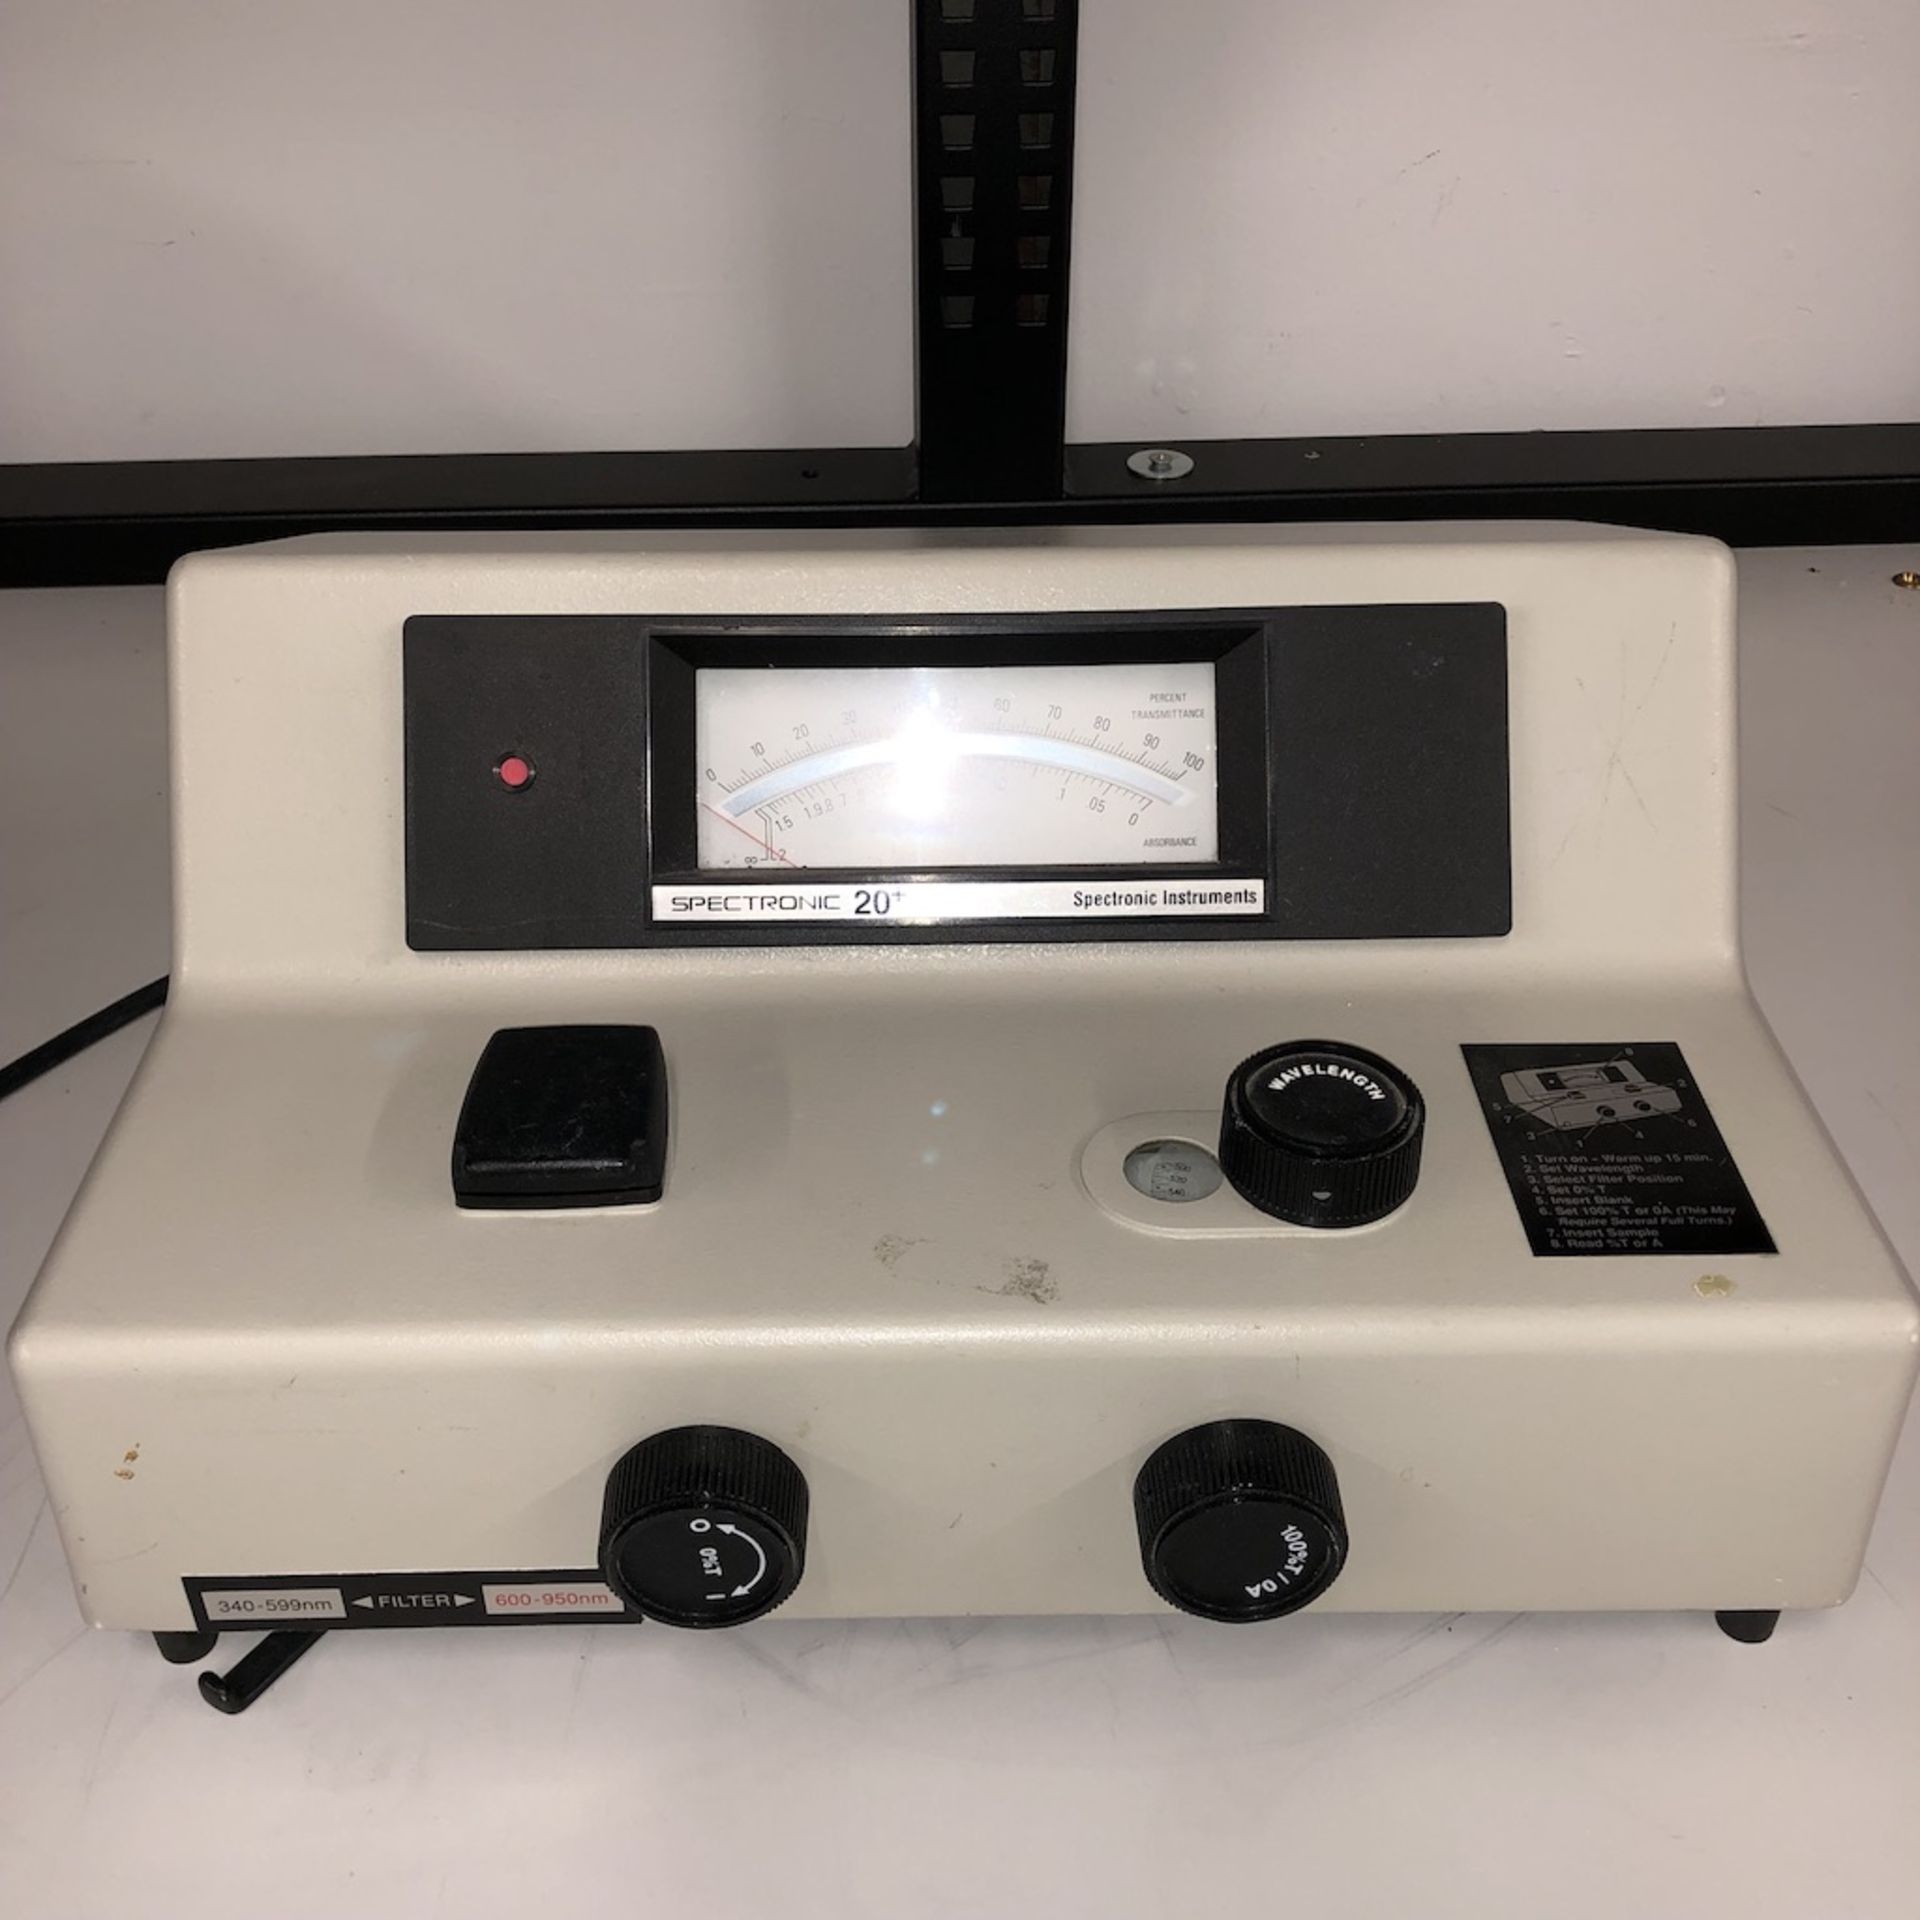 SPECTRONIC INSTRUMENTS 333182 SPECTRONIC 20+ SPECTROMETER - Image 3 of 7